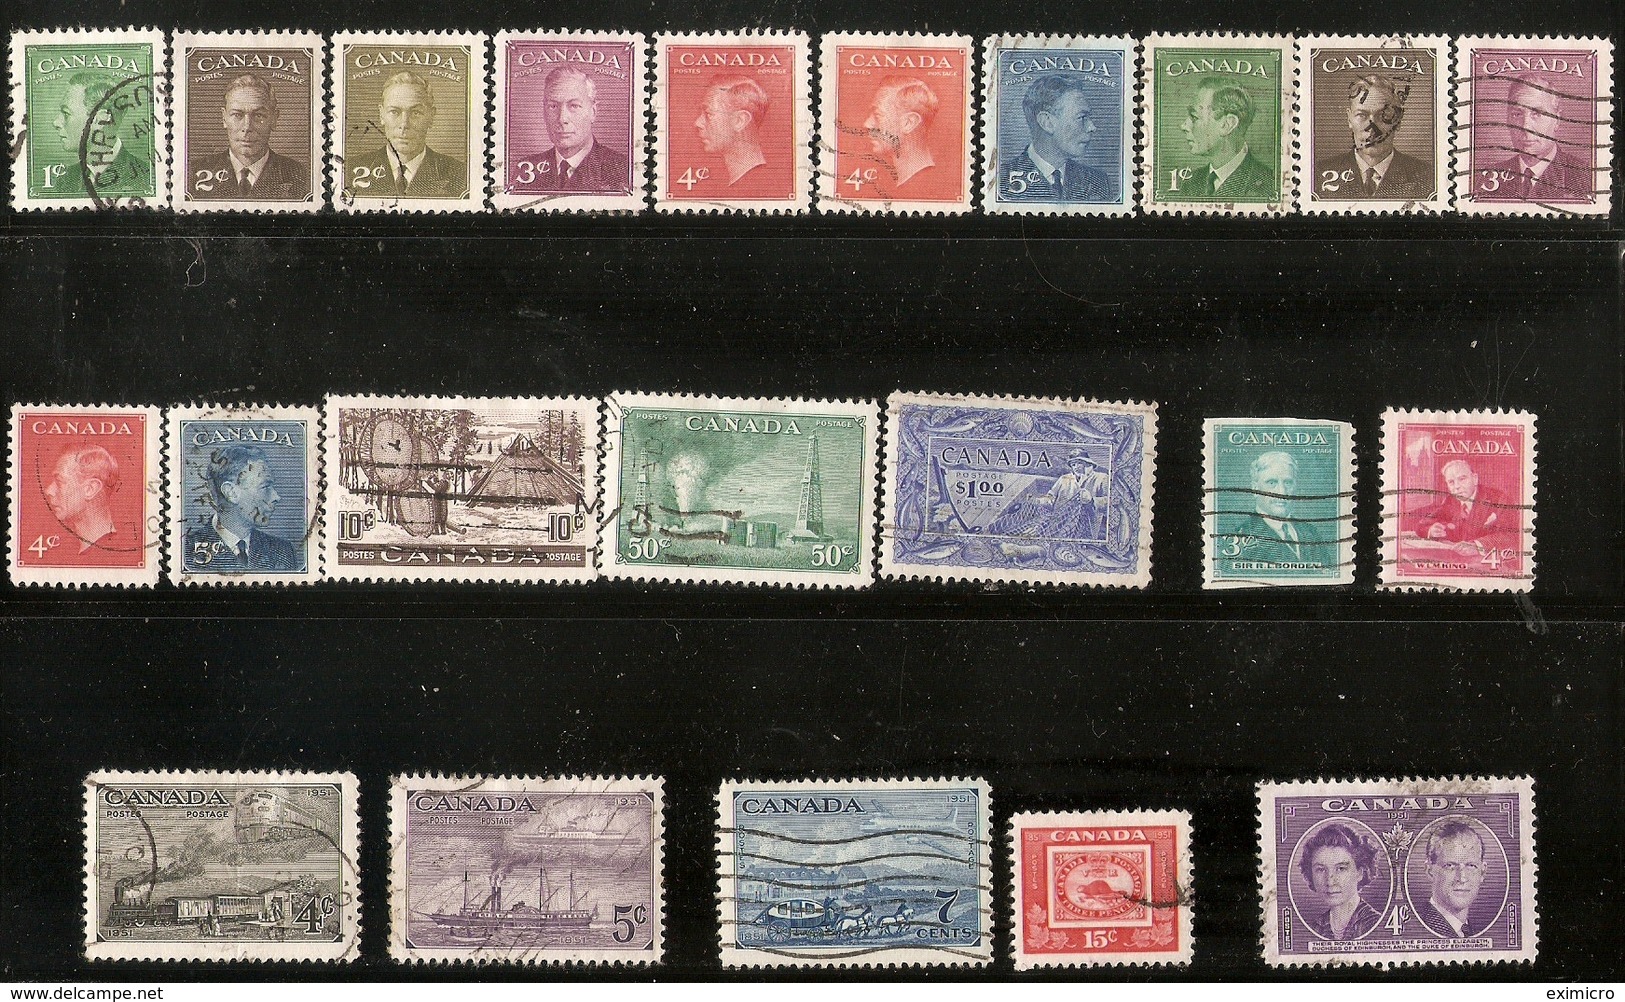 CANADA 1937 - 1951 FINE USED COLLECTION OF SETS ON 2 SCANS Cat £49+ - Used Stamps